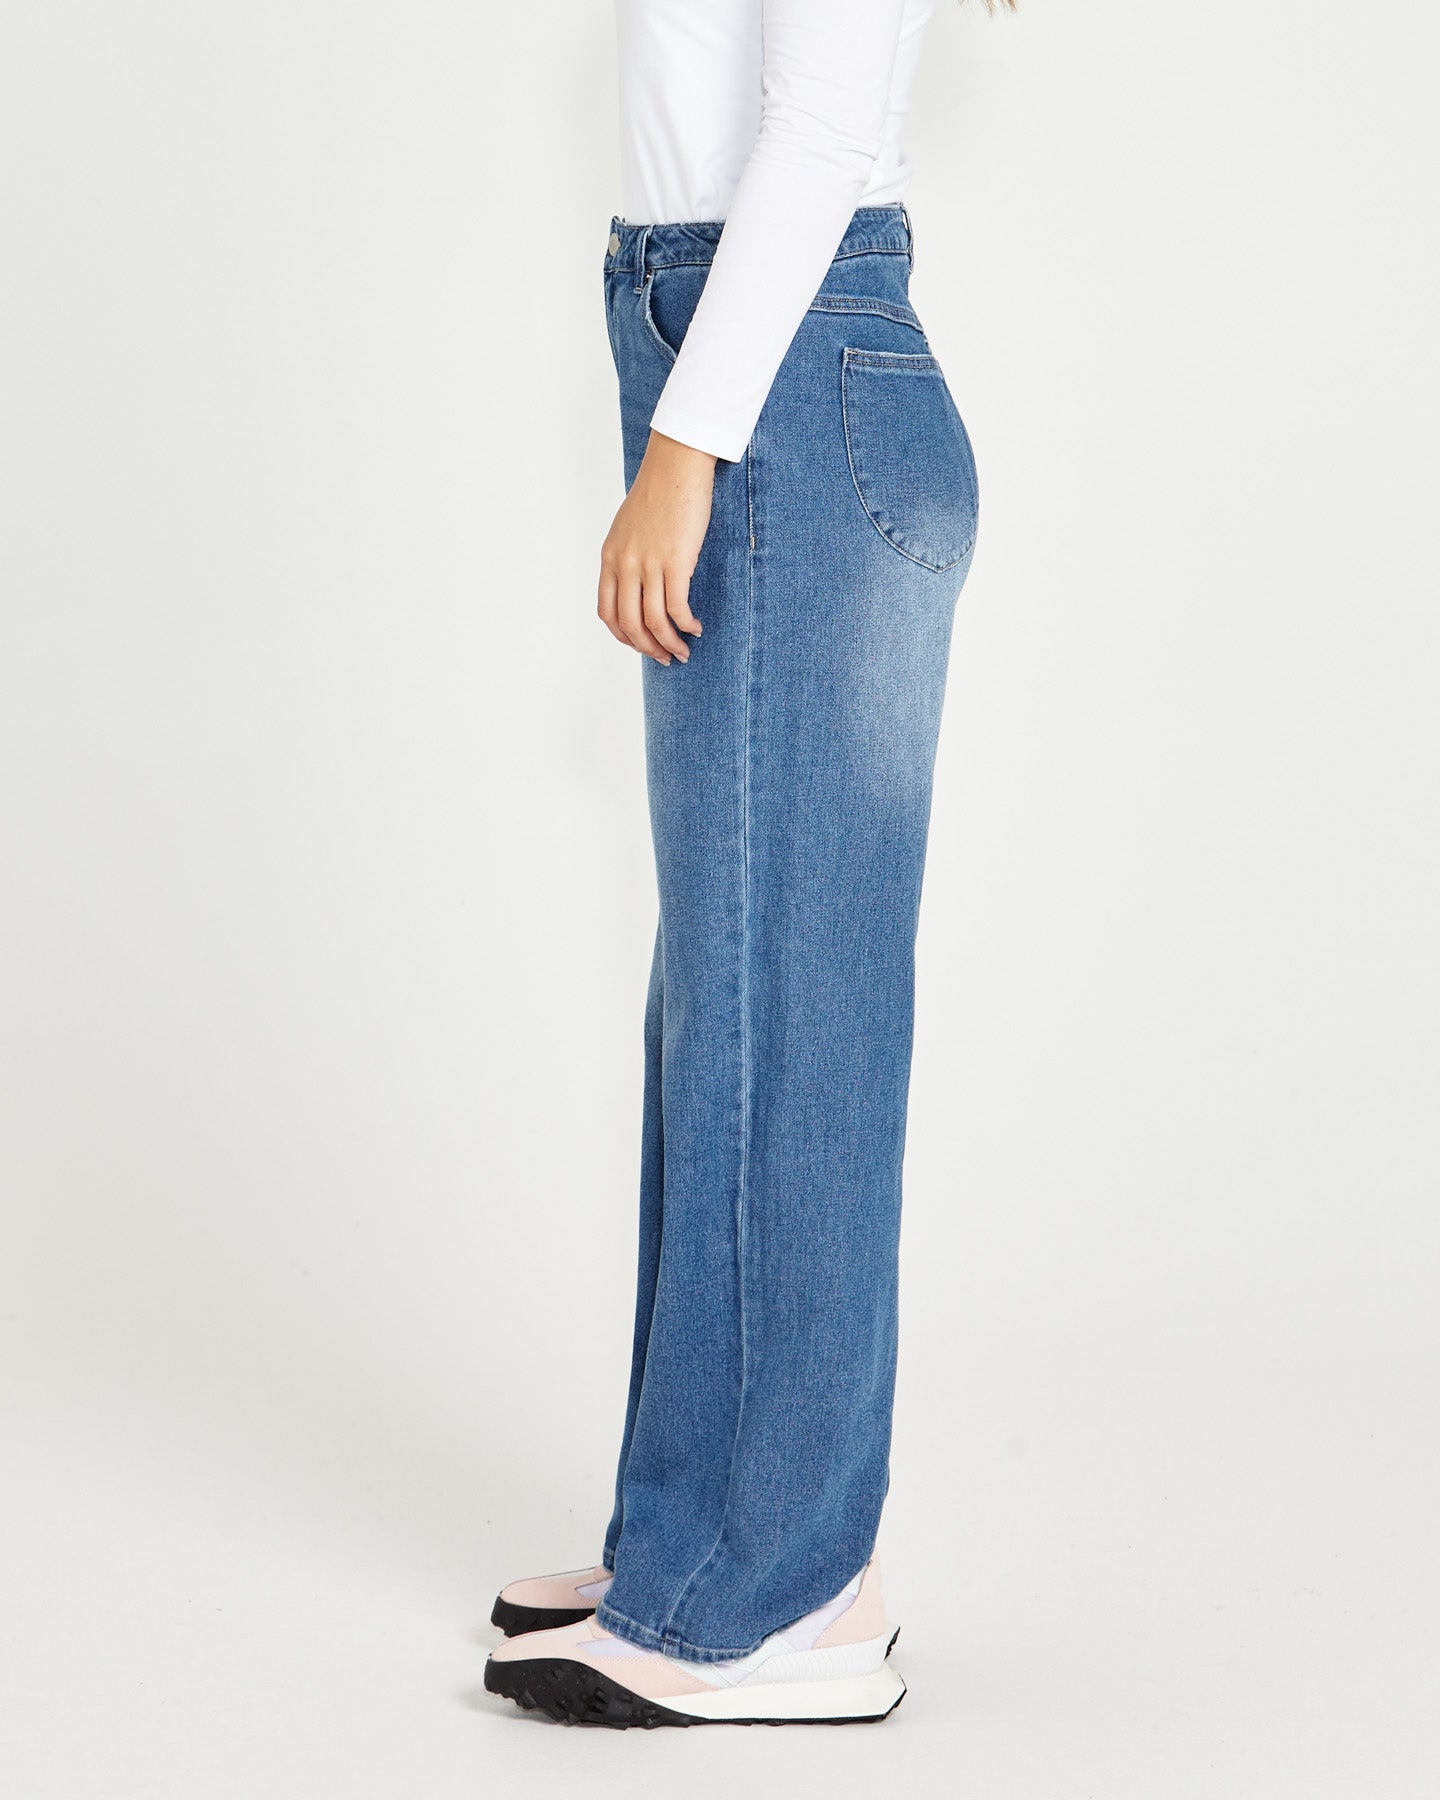 Sass Emerald High Wasted Wide Leg Jeans - 80 Wash